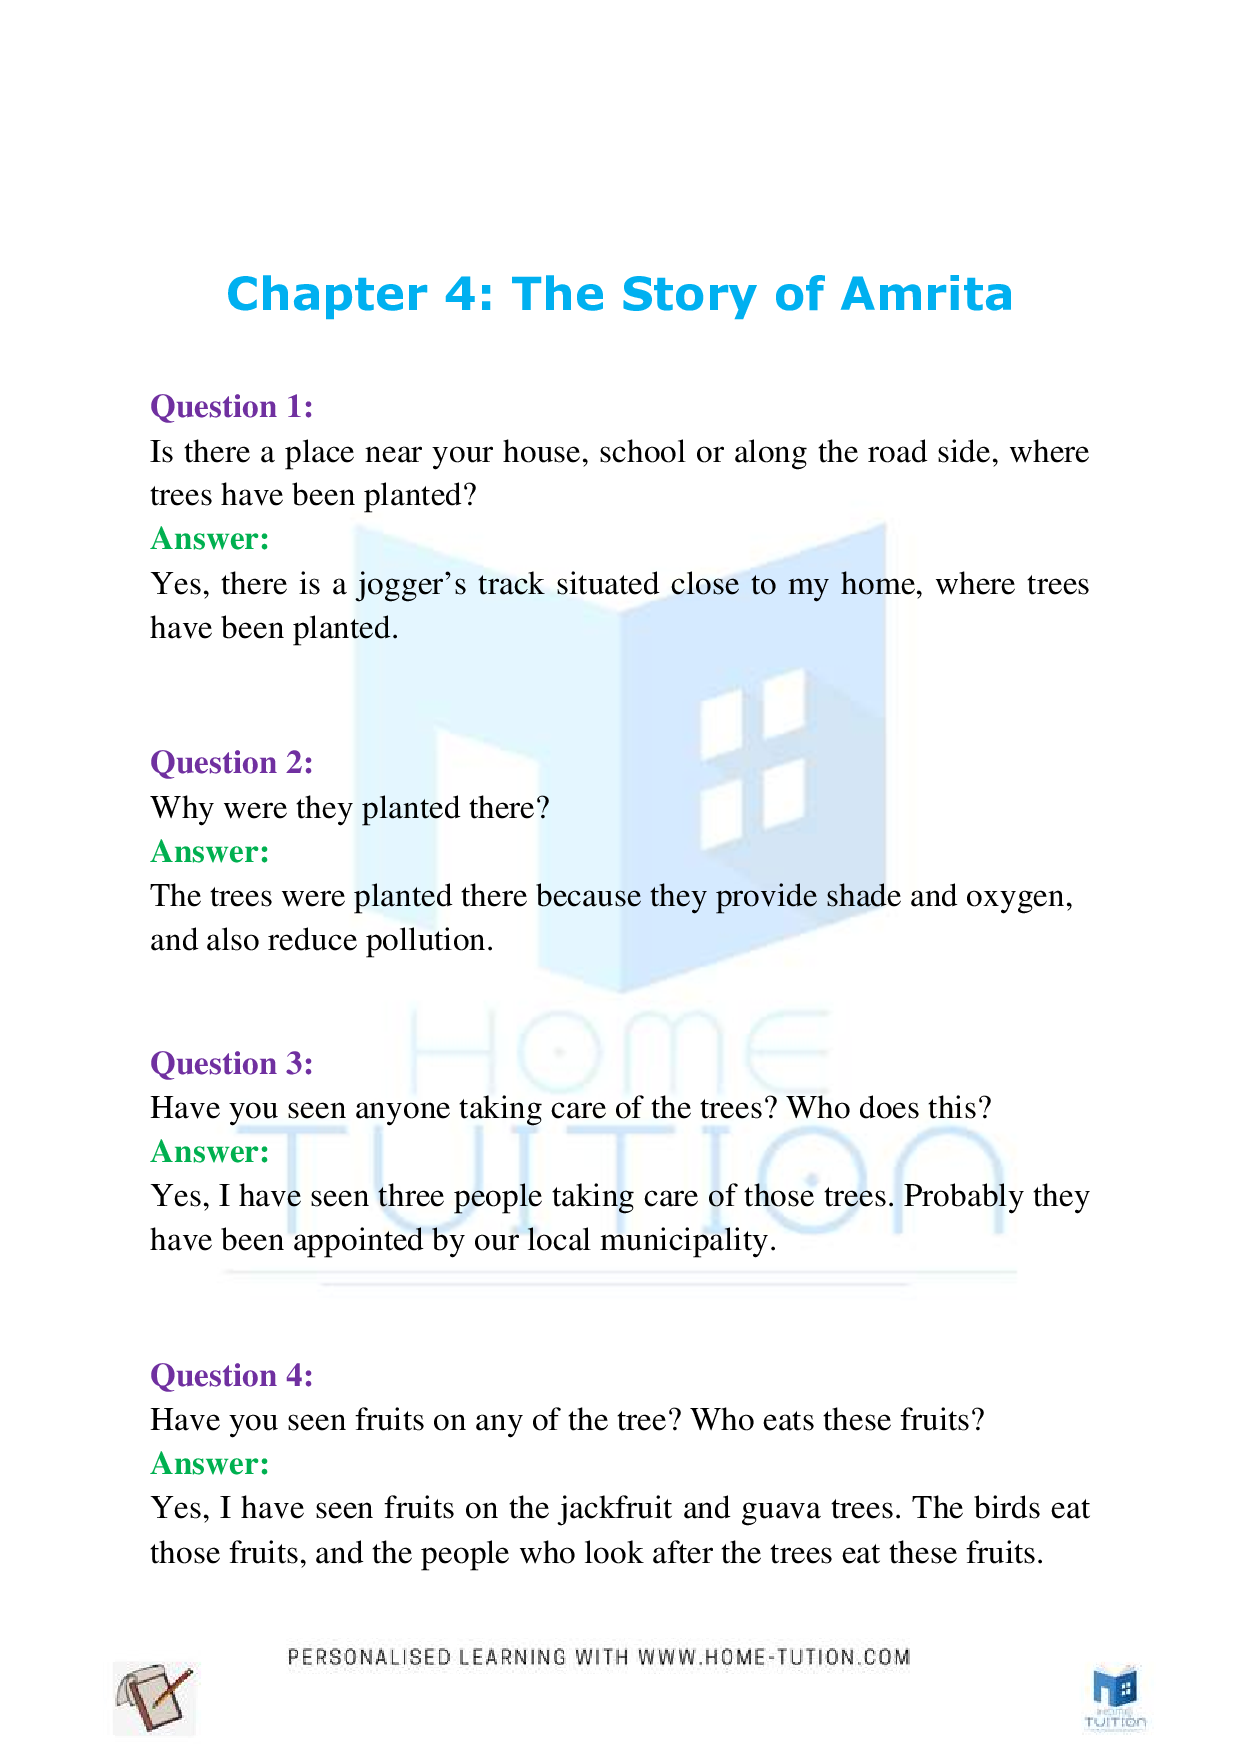 NCERT Class 4 EVS Chapter-4 The Story of Amrita